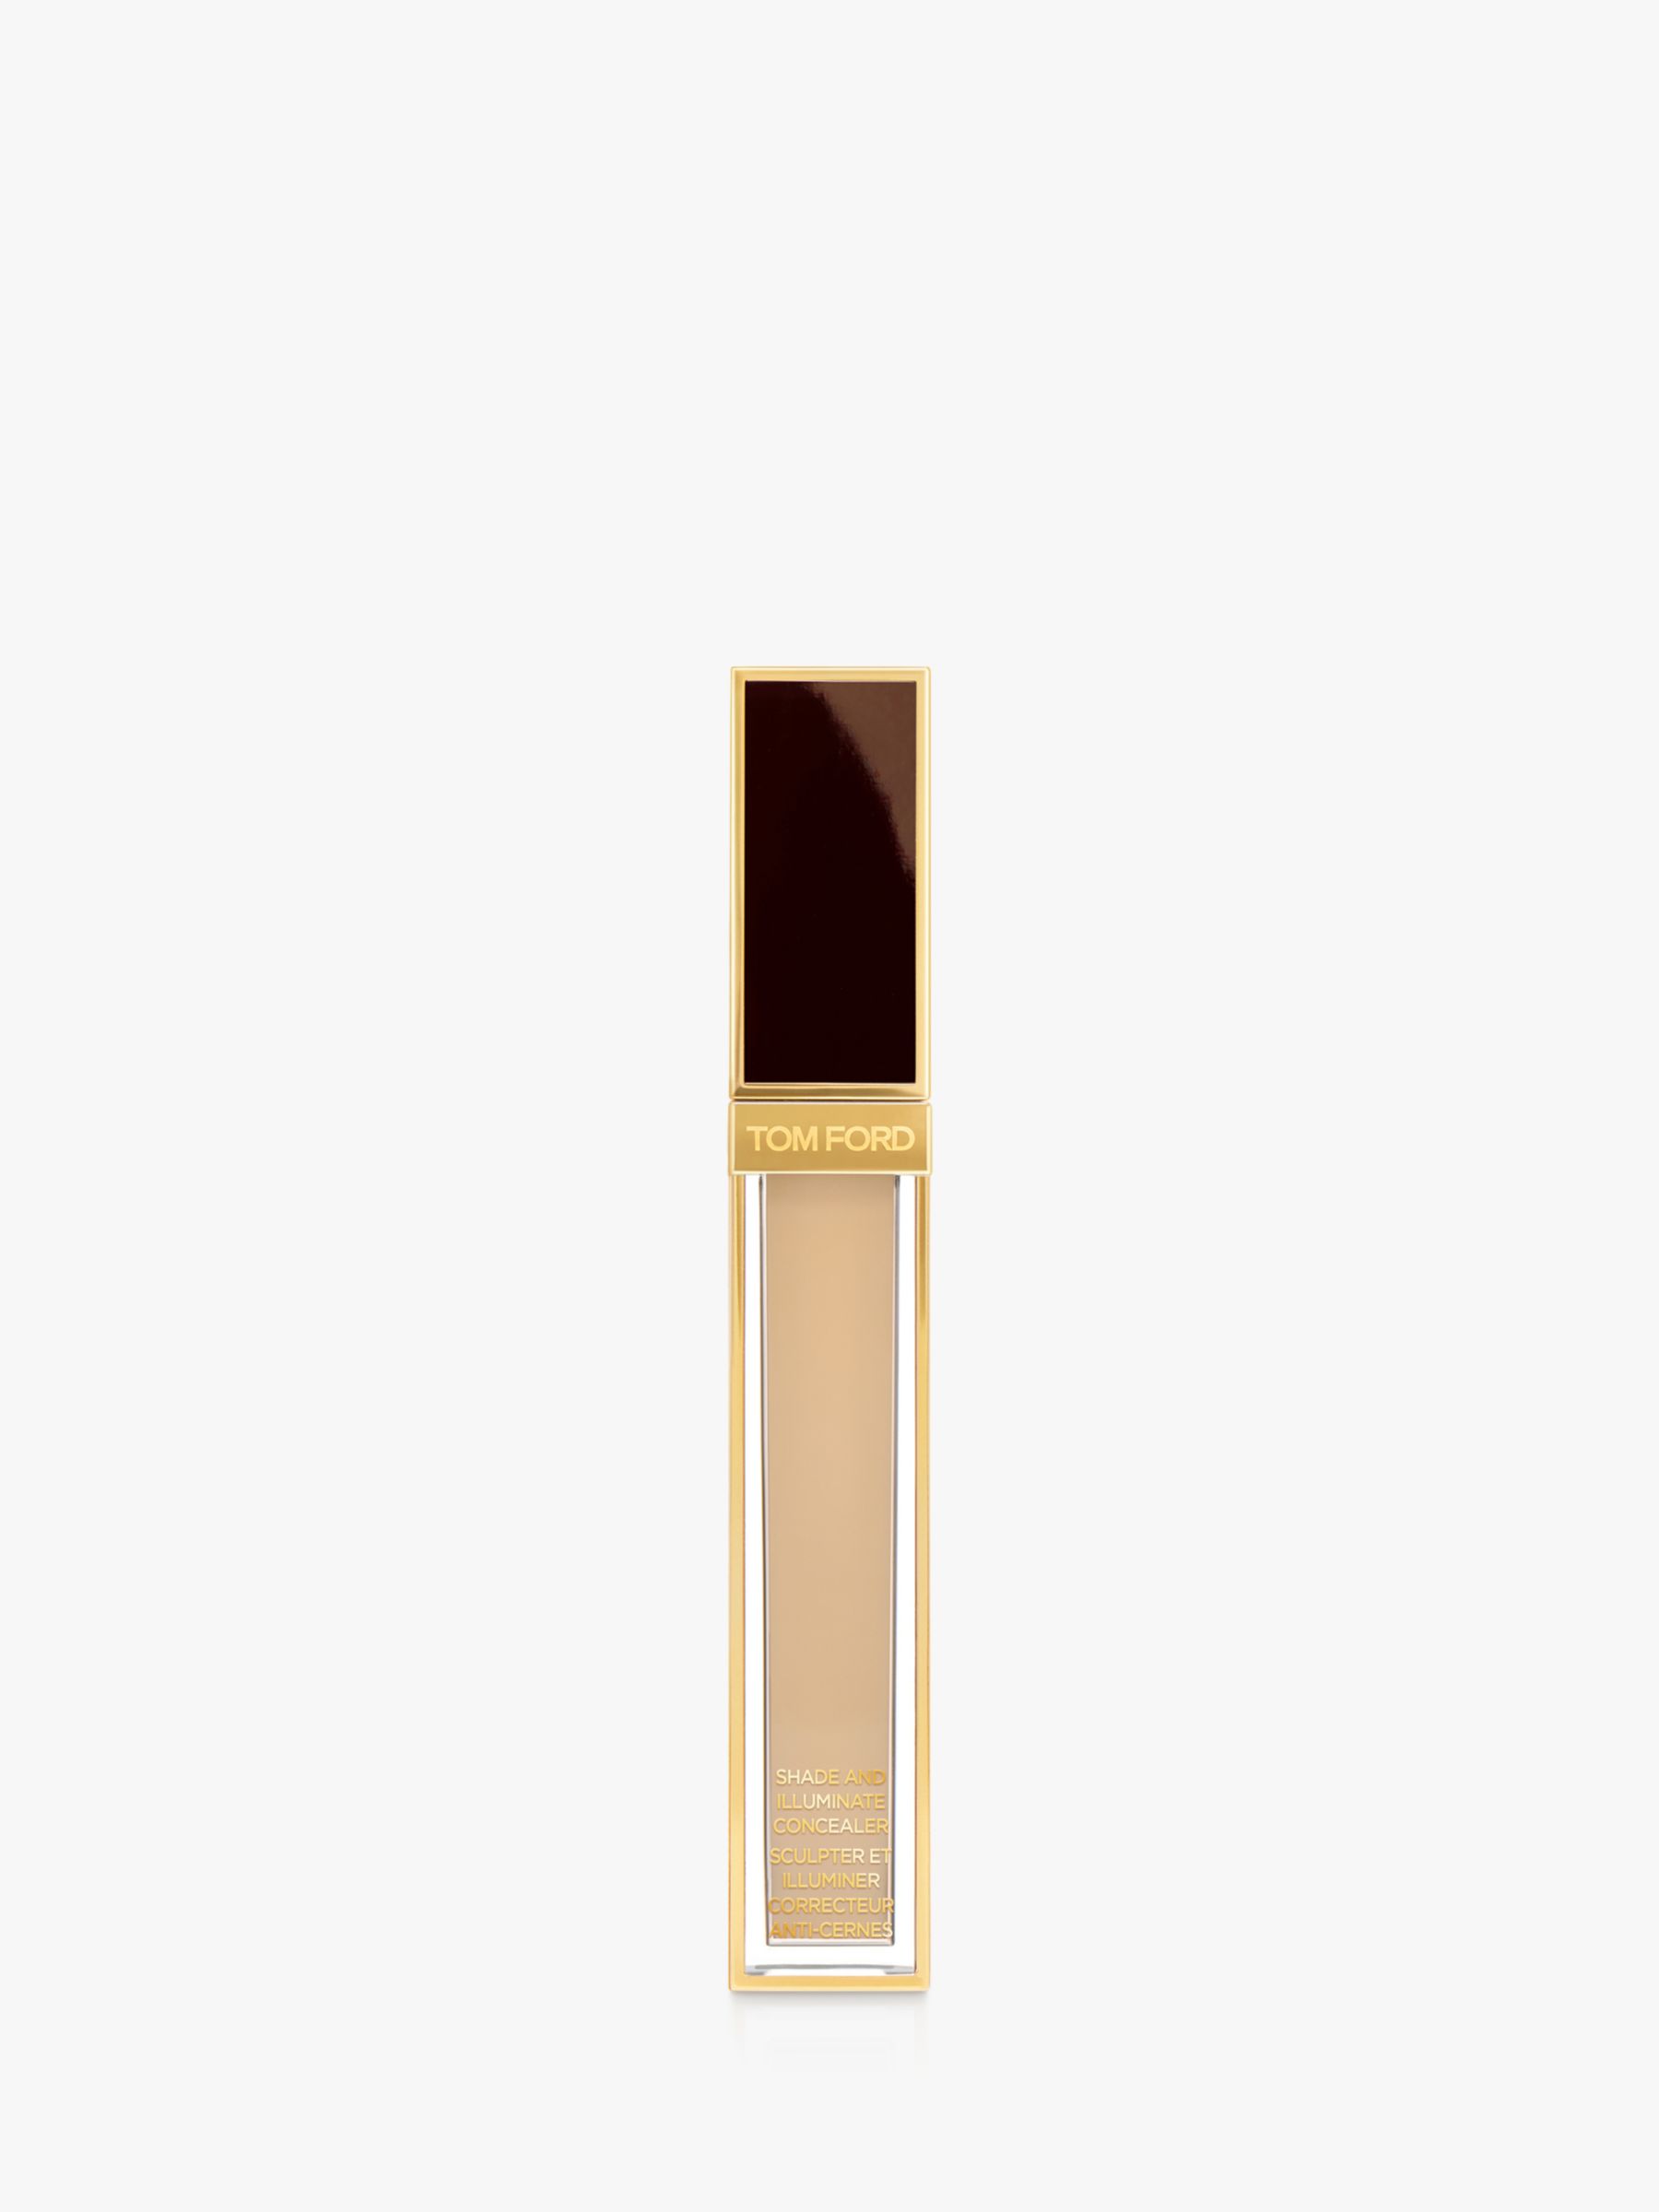 TOM FORD Shade & Illuminate Concealer, 2W1 Taupe at John Lewis & Partners